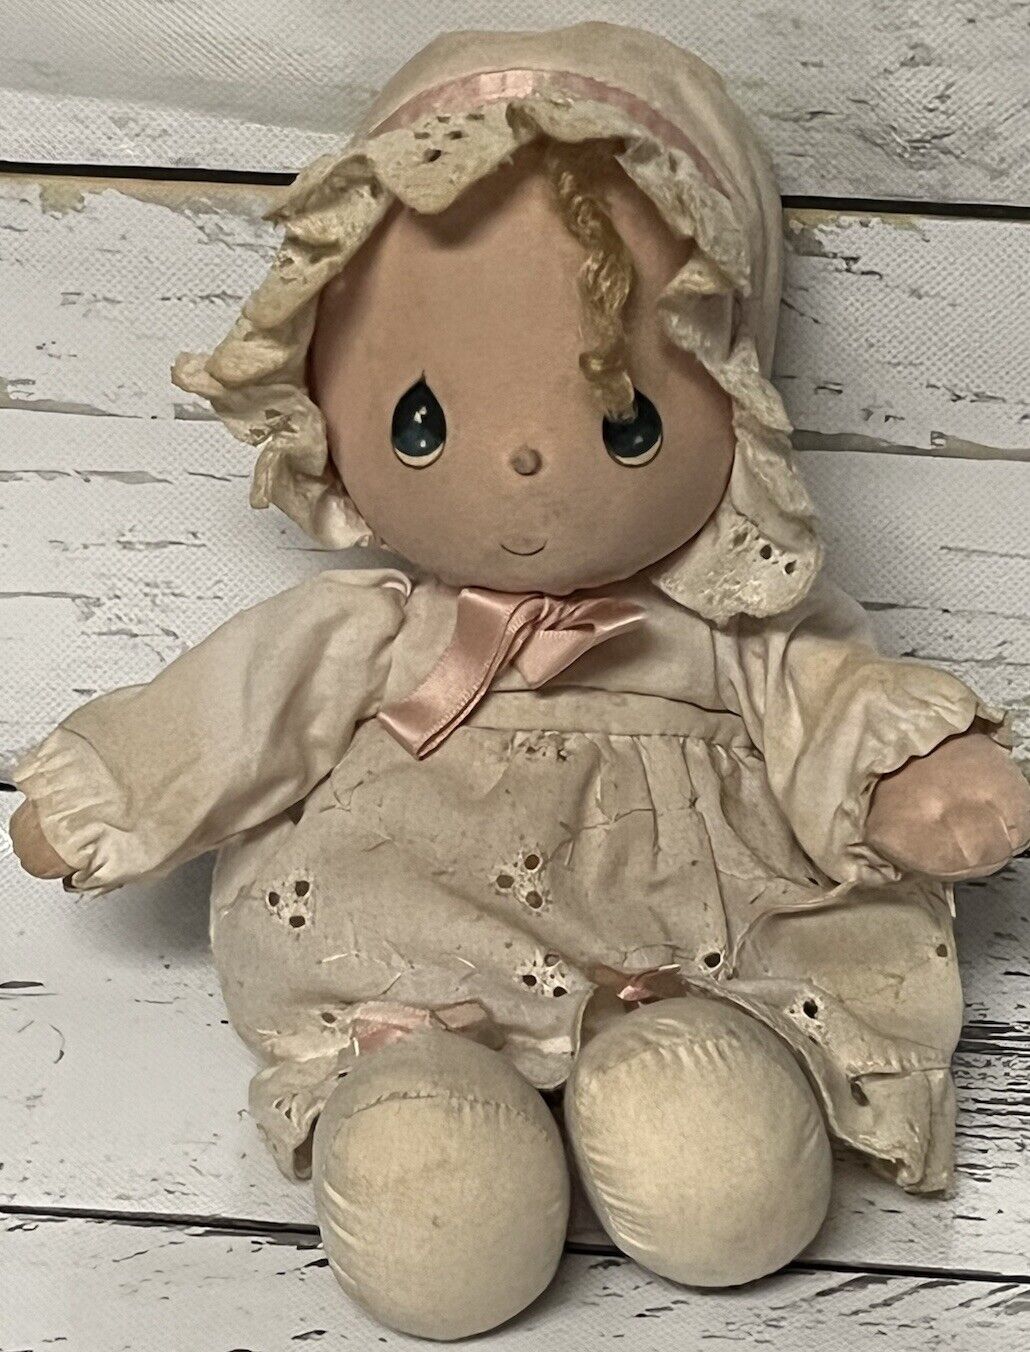 Vintage 1987 Applause Berrie Antimated Music Precious Moment Doll Sissy #16502